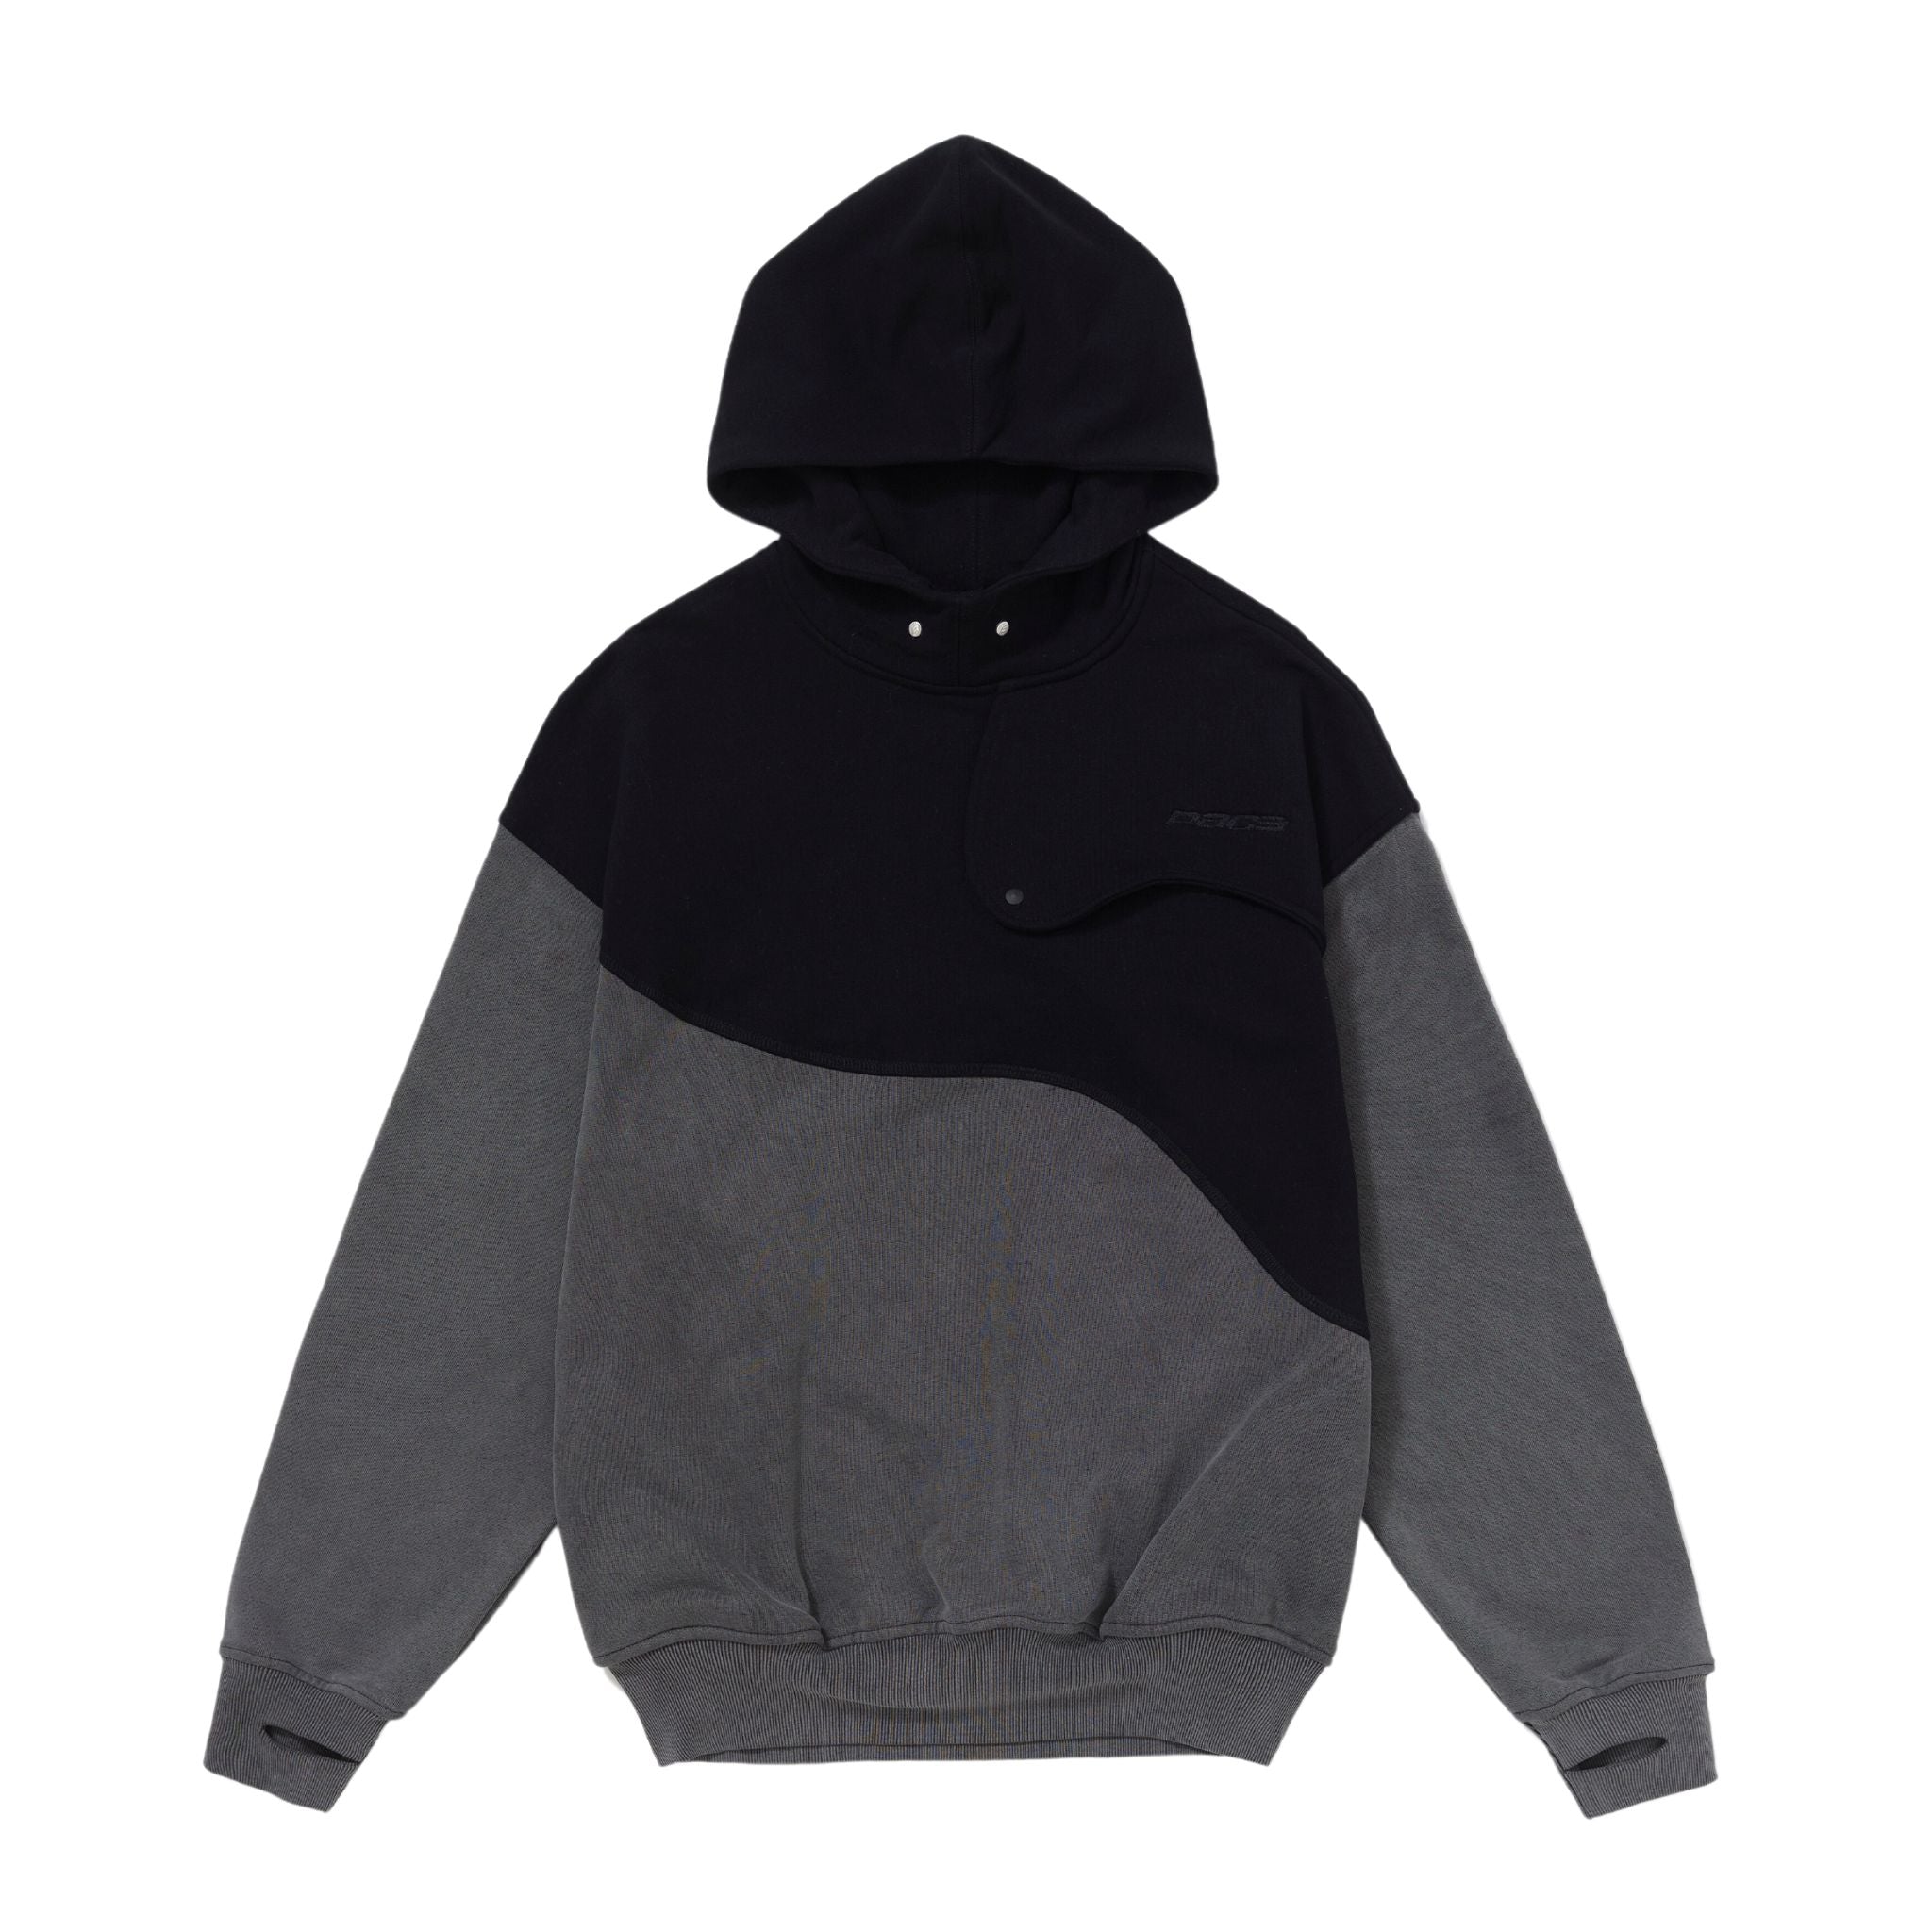 PACE - Plasticity Hoodie "Black" - THE GAME